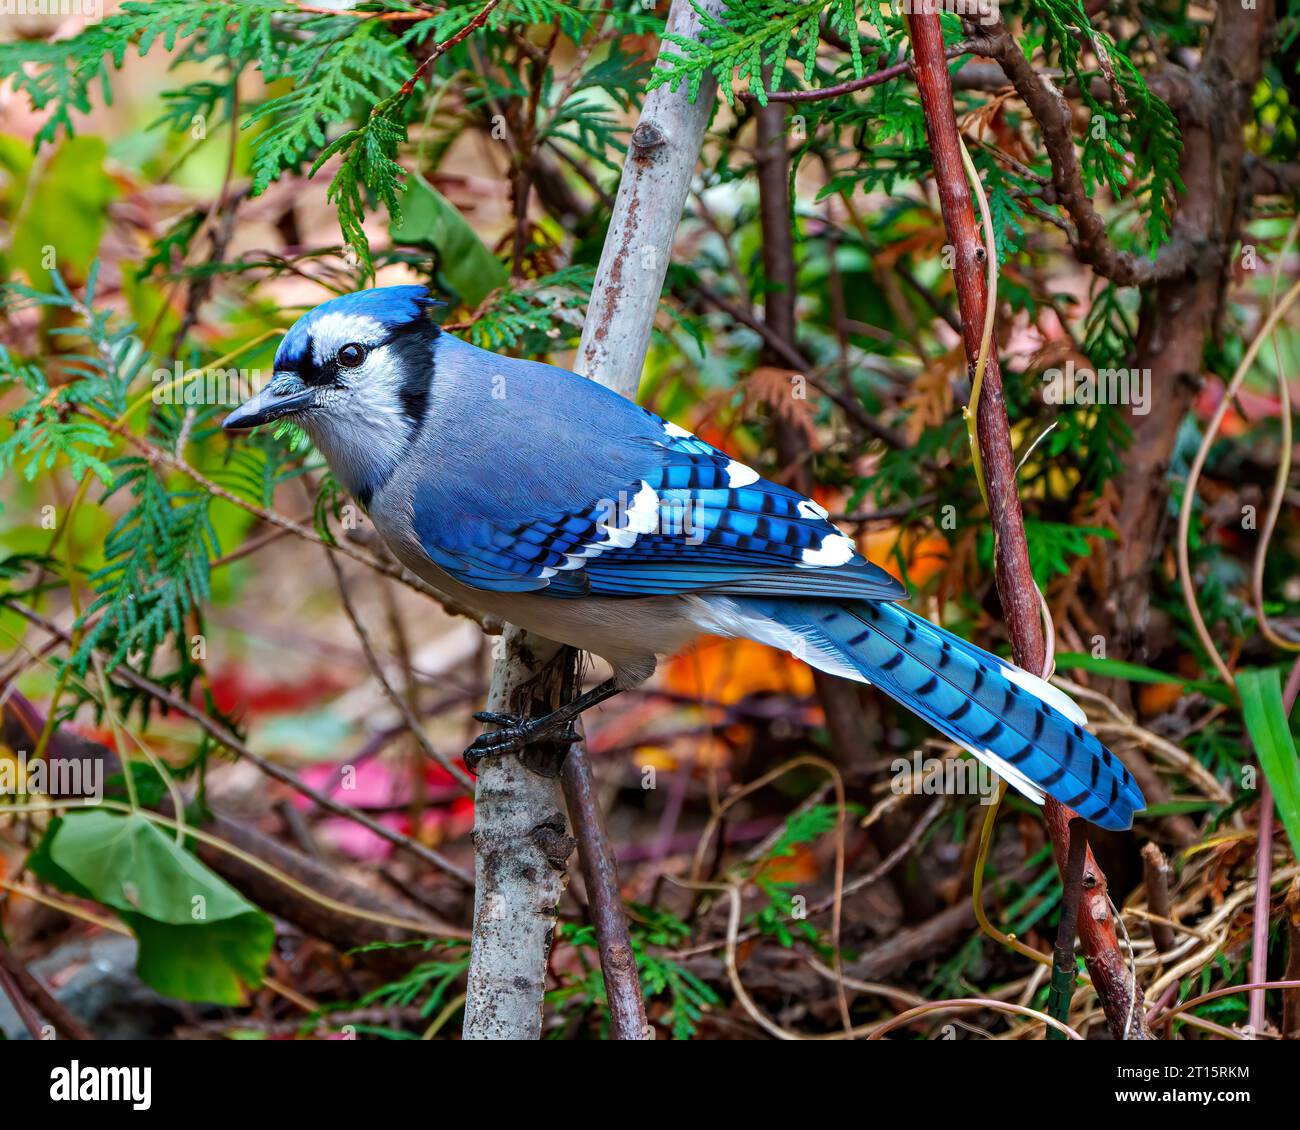 Blue Jay close-up side view perched on a branch with a cedar trees background in the forest environment and habitat displaying blue feathers. Jay Bird Stock Photo